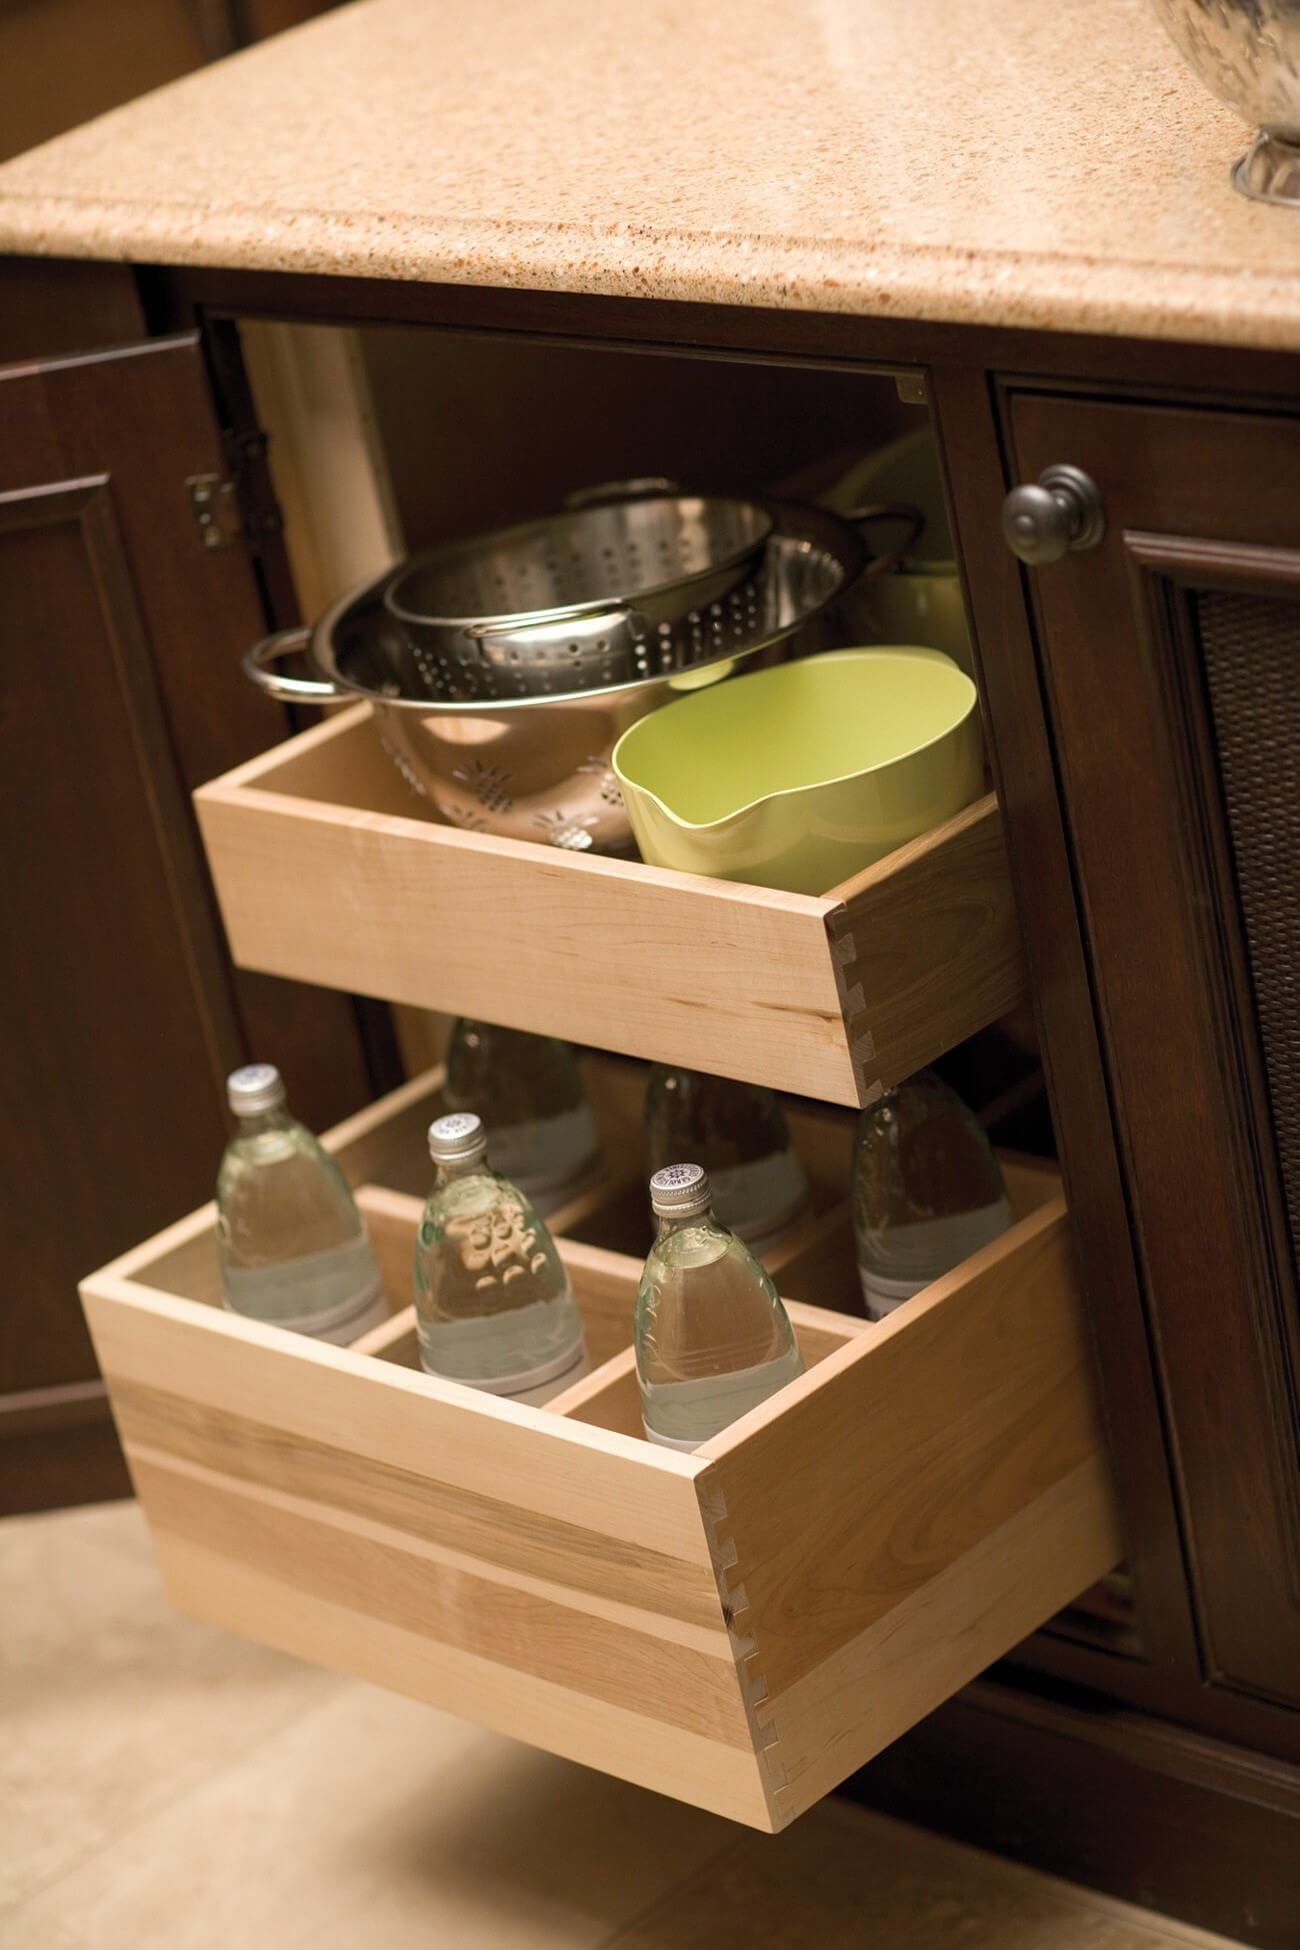 Roll-Out Bottle Rack by Dura Supreme Cabinetry with a Roll-out shelf above.